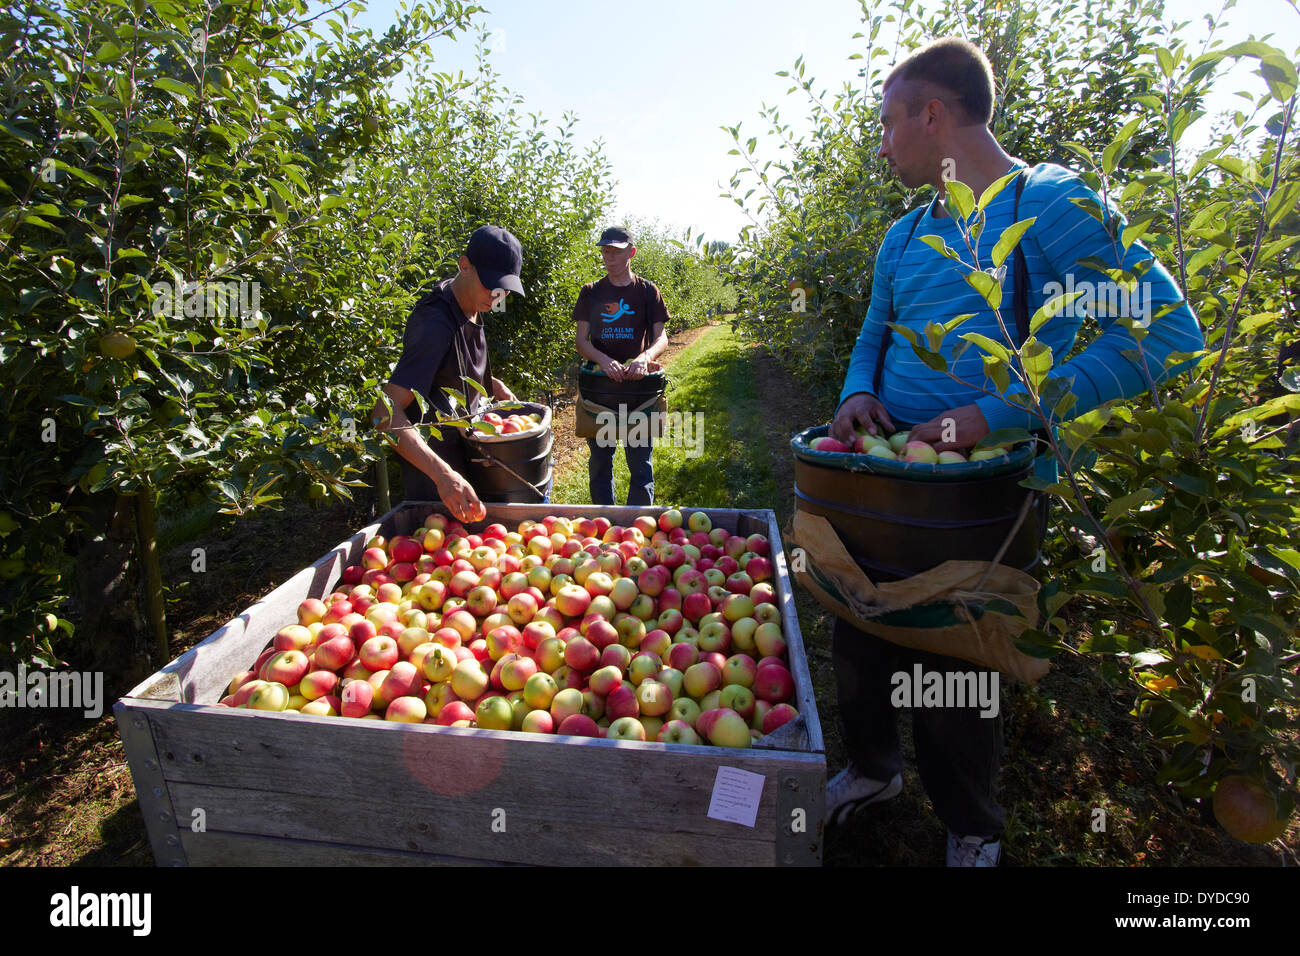 Workers emptying apples into a bin. Stock Photo